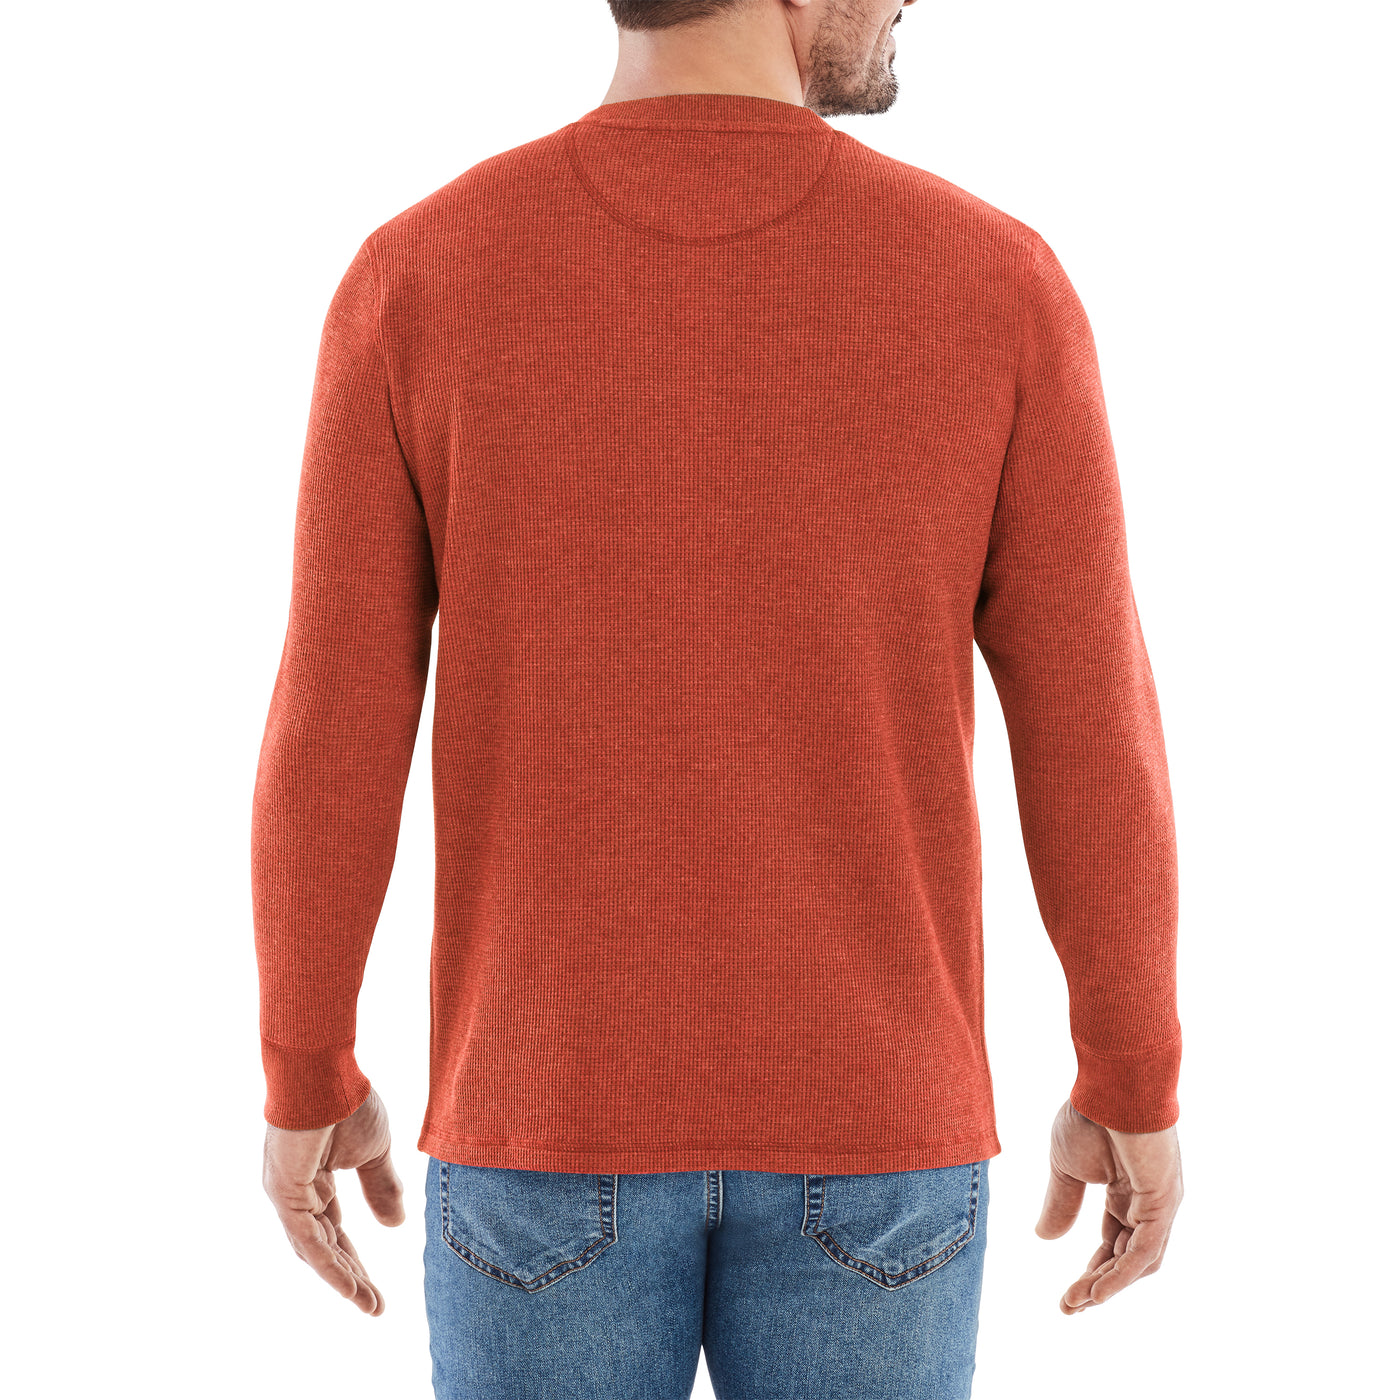 The American Outdoorsman Long-Sleeve Waffle Knit Thermal Henley Shirts with Pocket for Men